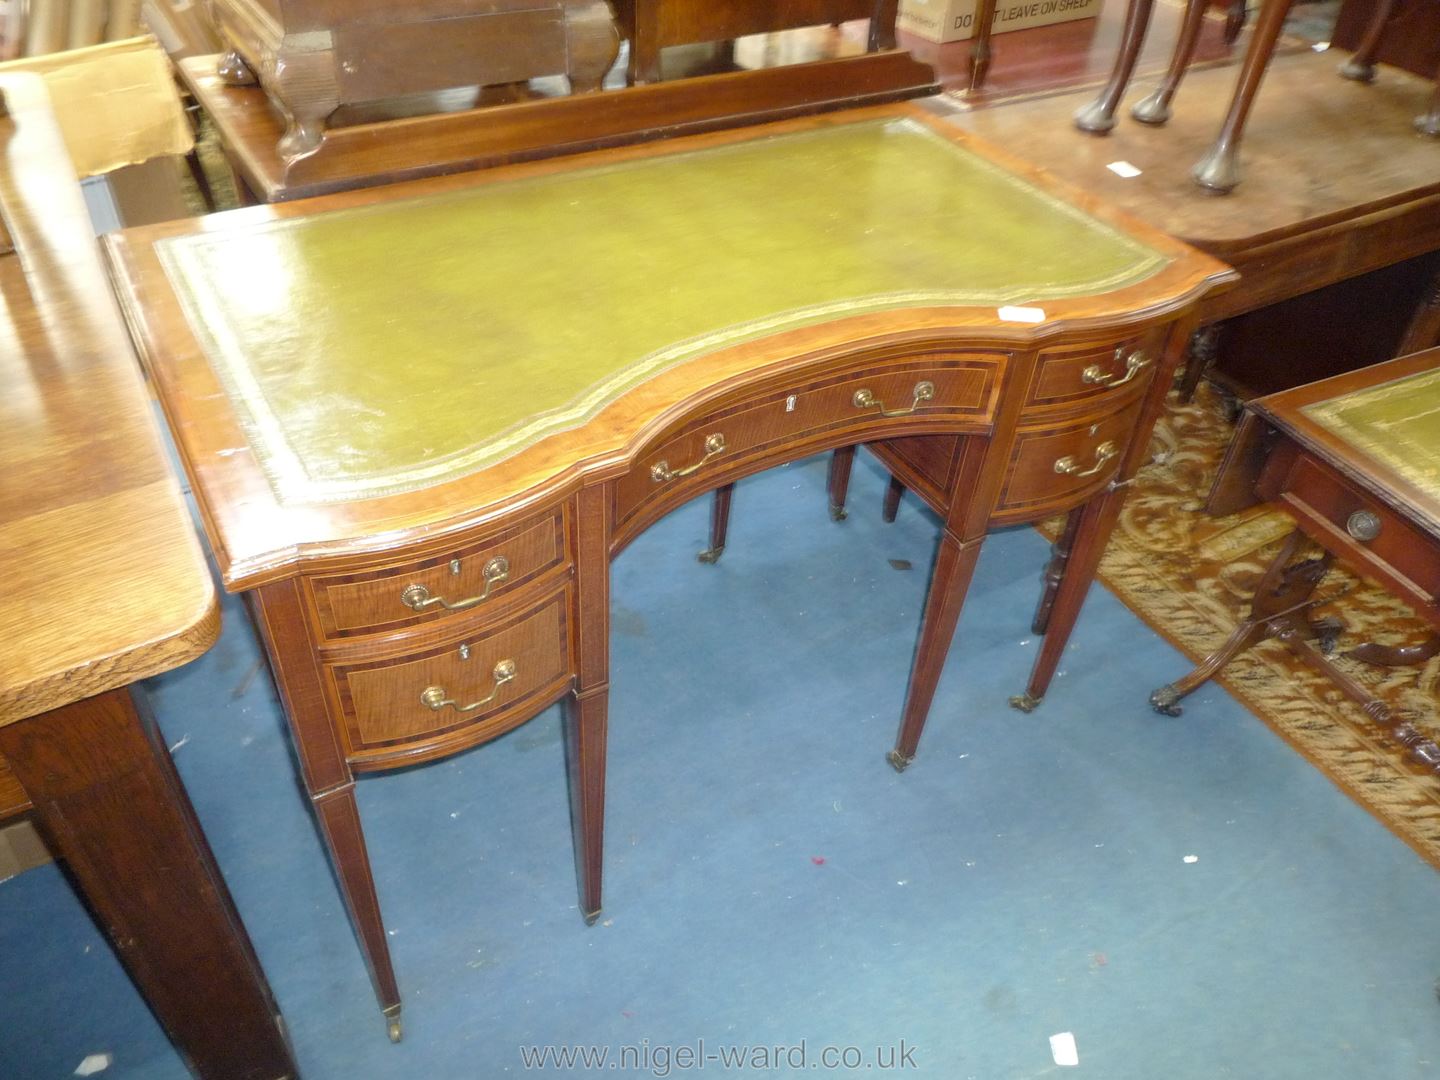 A lovely circa 1900 serpentine fronted Writing Table in Mahogany and other wood with light and - Image 3 of 3